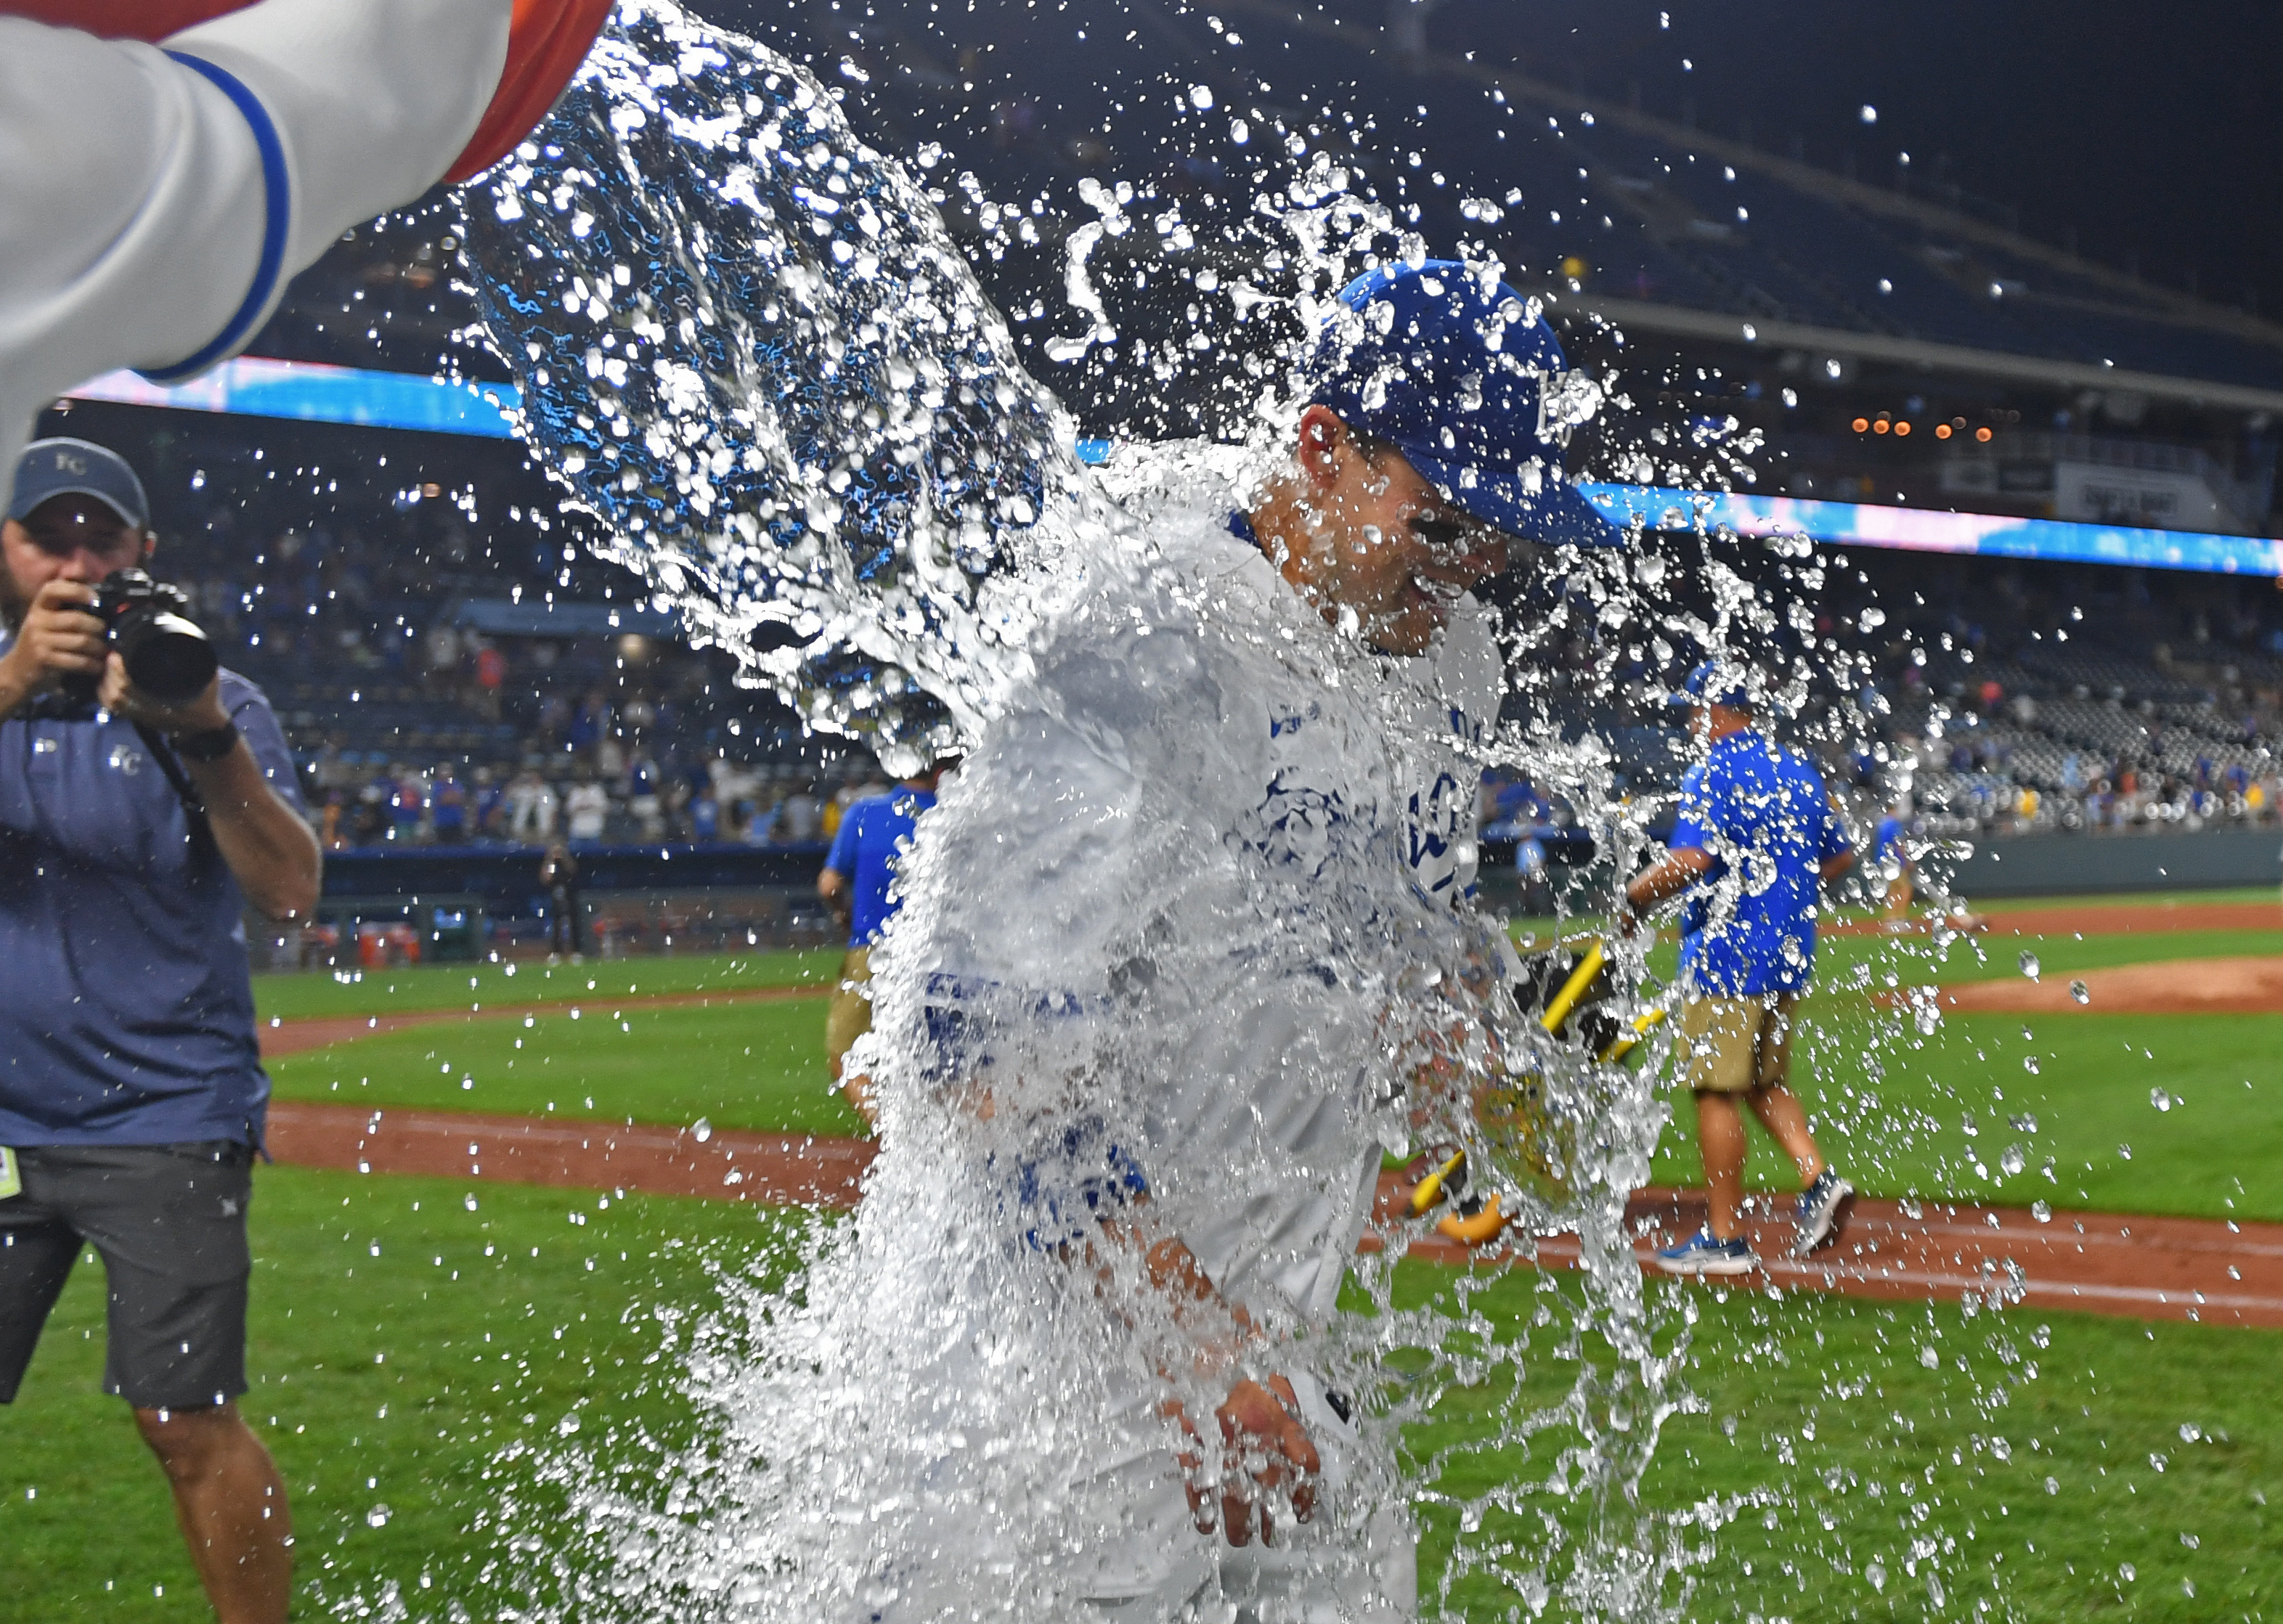 Cole Ragans shines as Royals blank Mets, win 5th straight